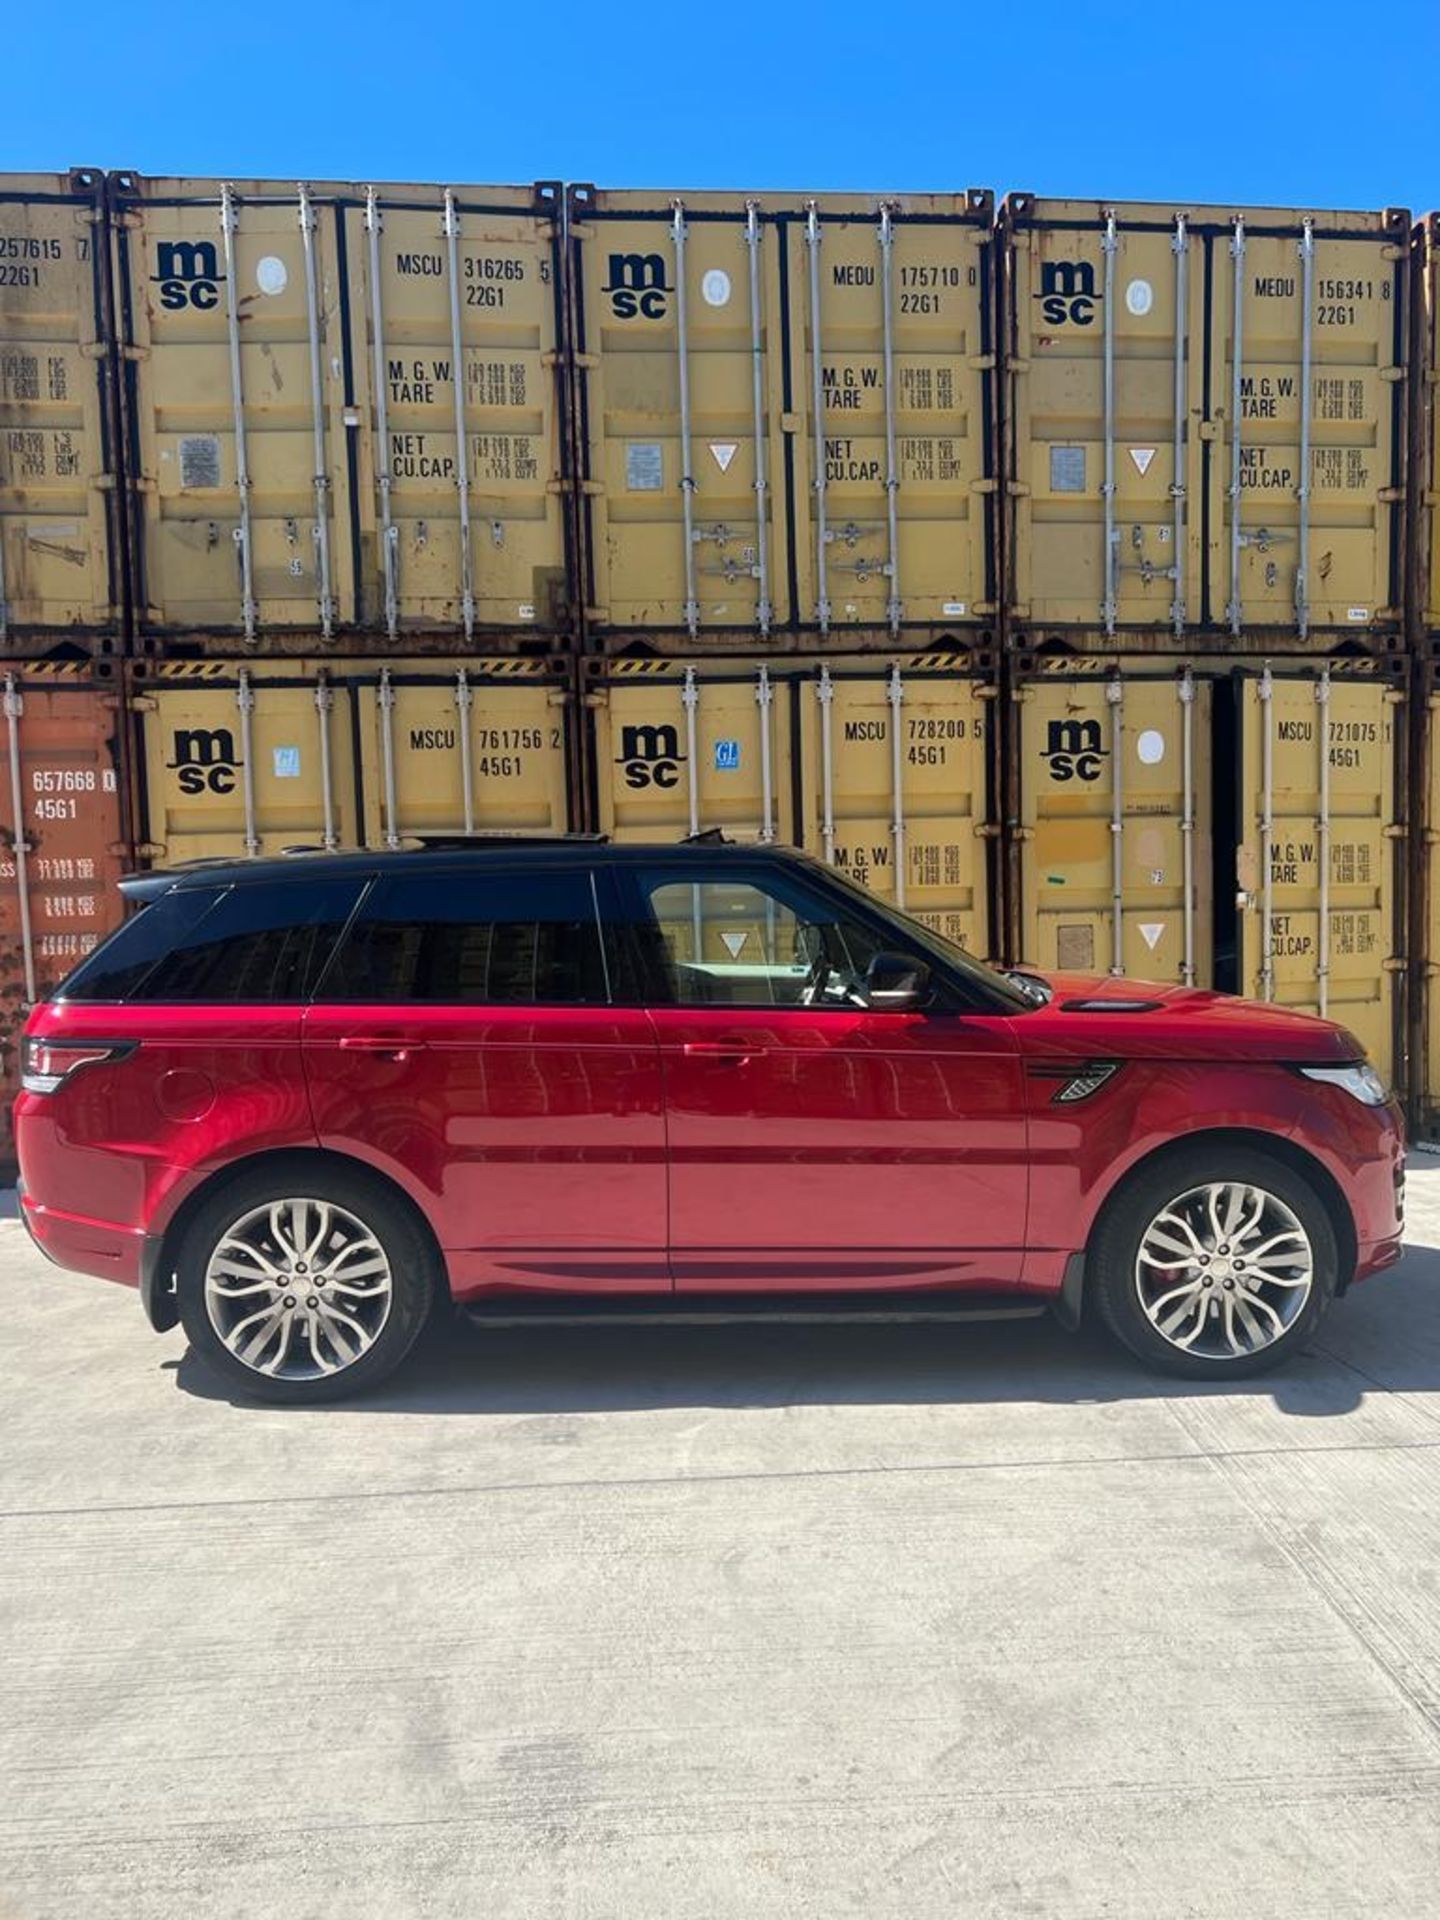 2014 LAND ROVER RANGE ROVER SPORT AUTOBIOGRAPHY DYNAMIC SDV8 AUTOMATIC RED *PLUS VAT* - Image 2 of 13